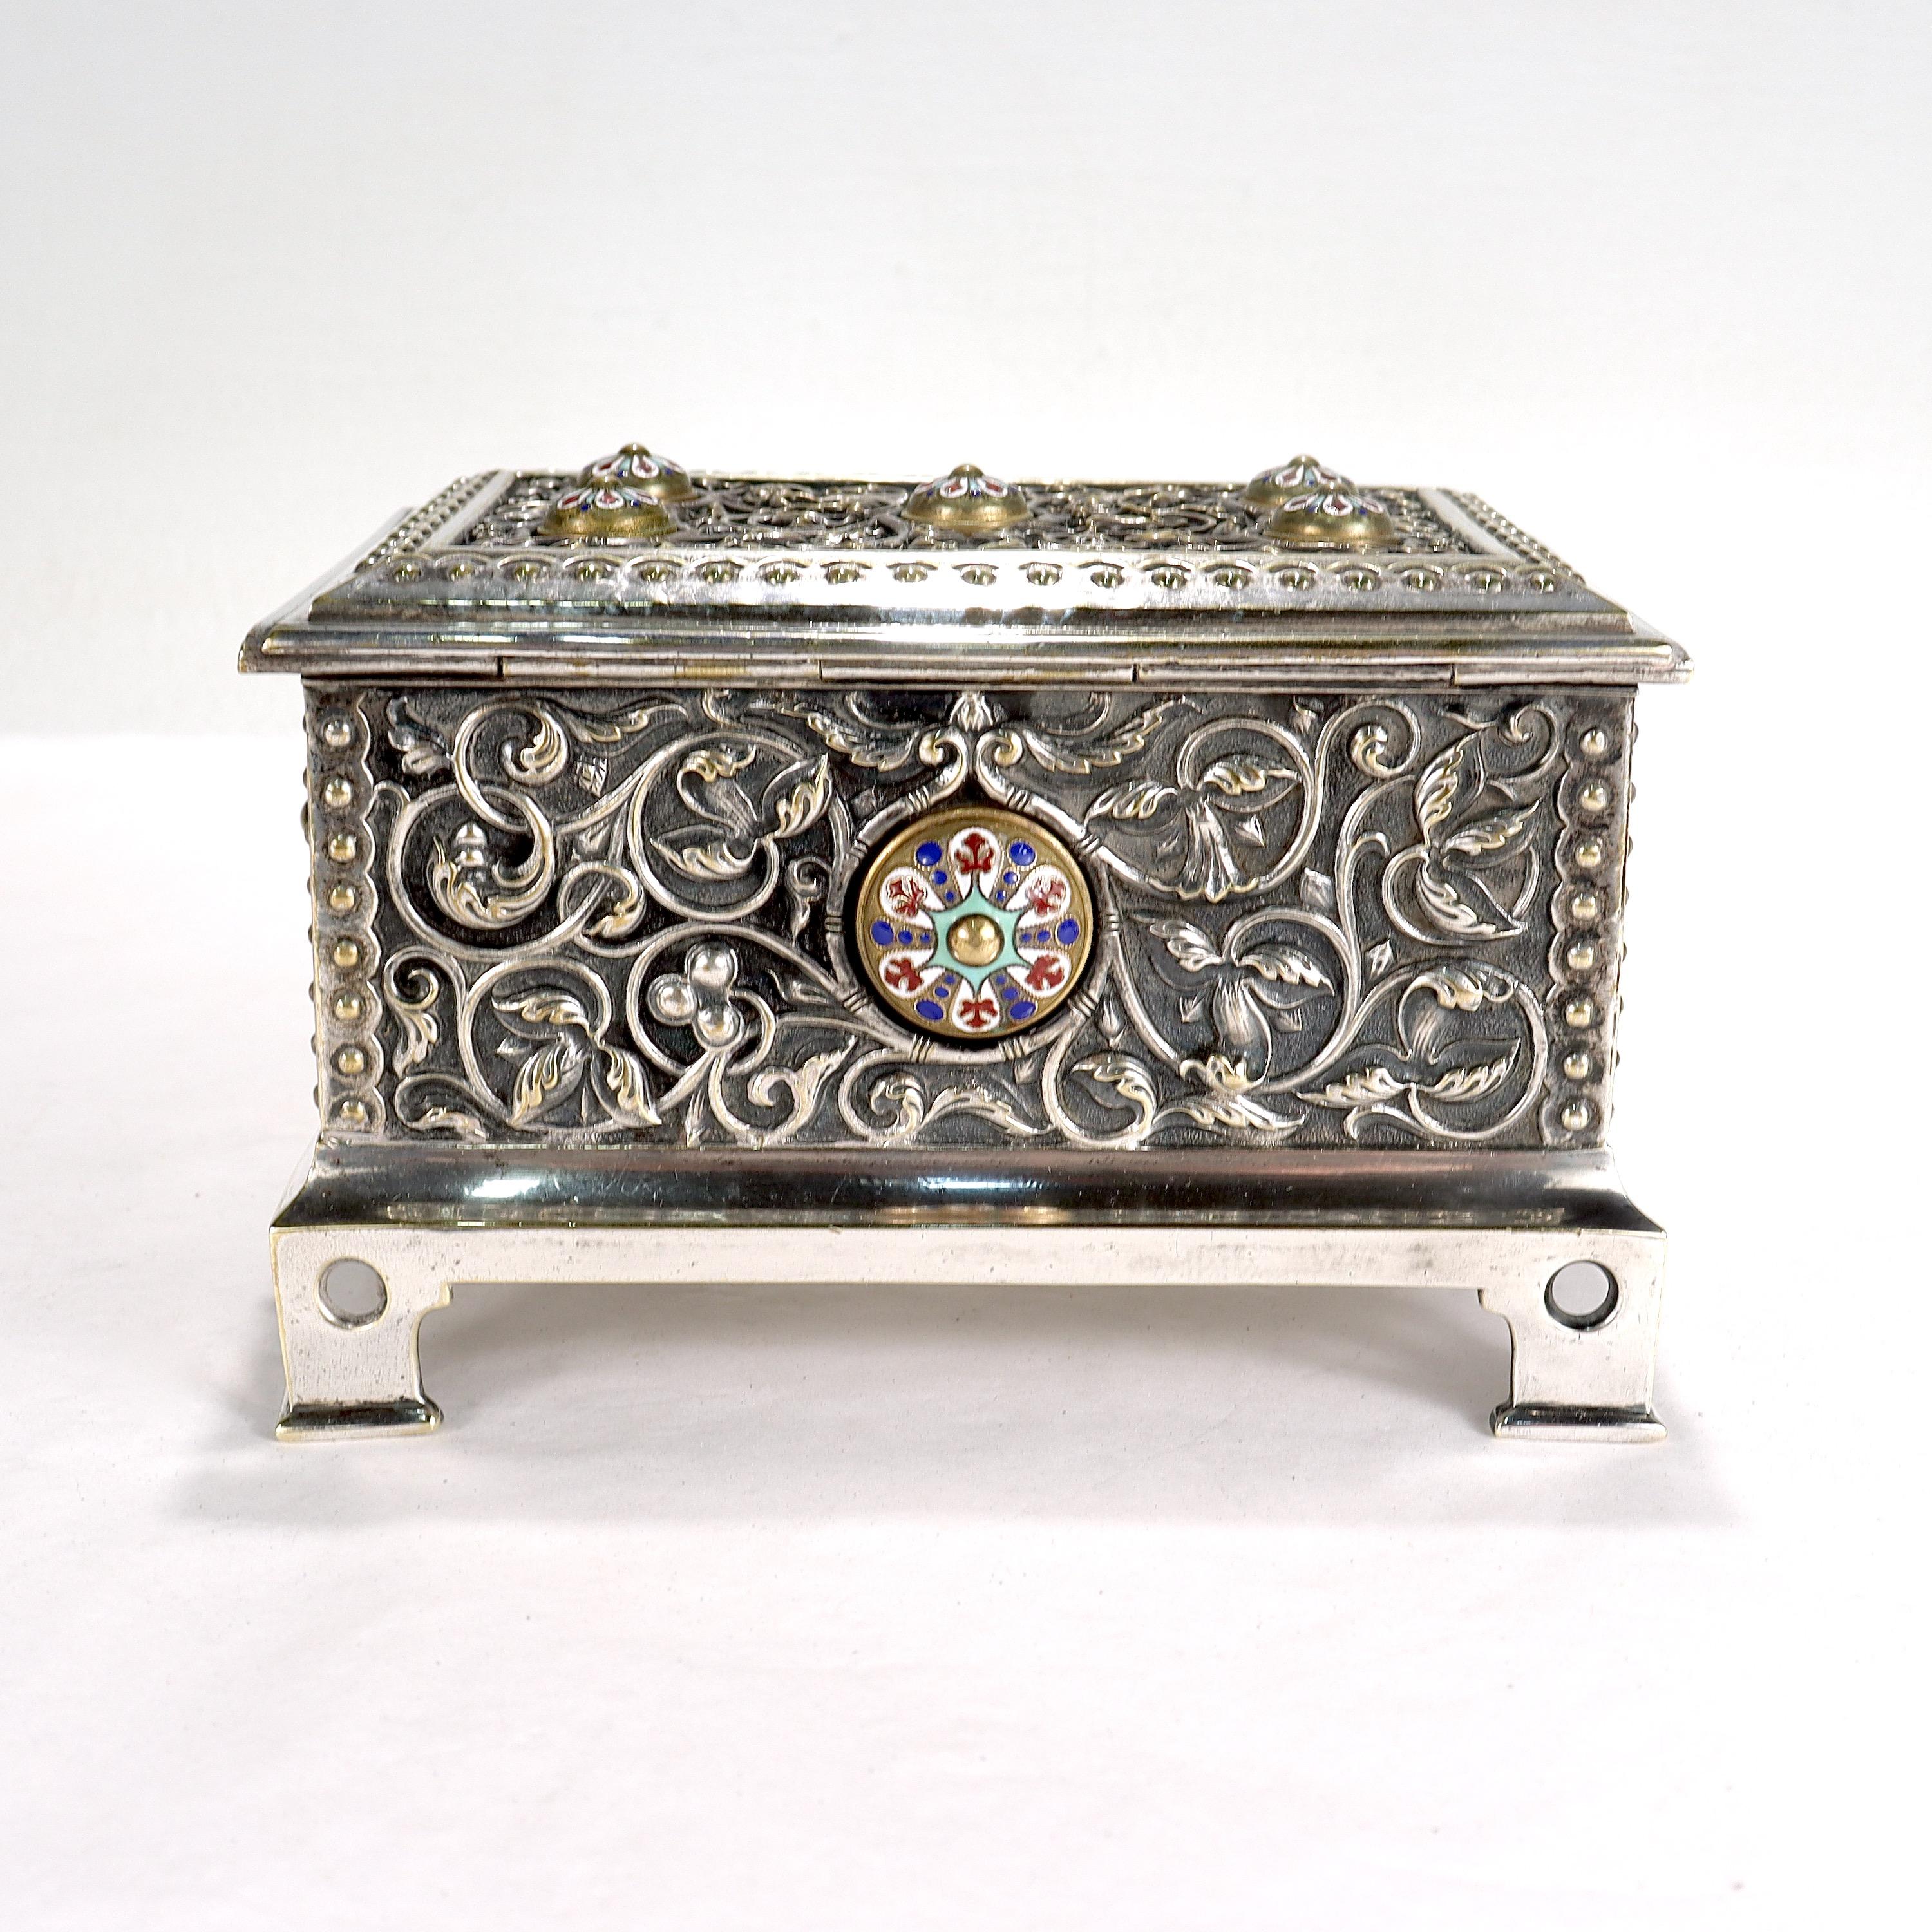 Antique Silver Plated & Enameled Table Box or Casket in the Russian Taste For Sale 1